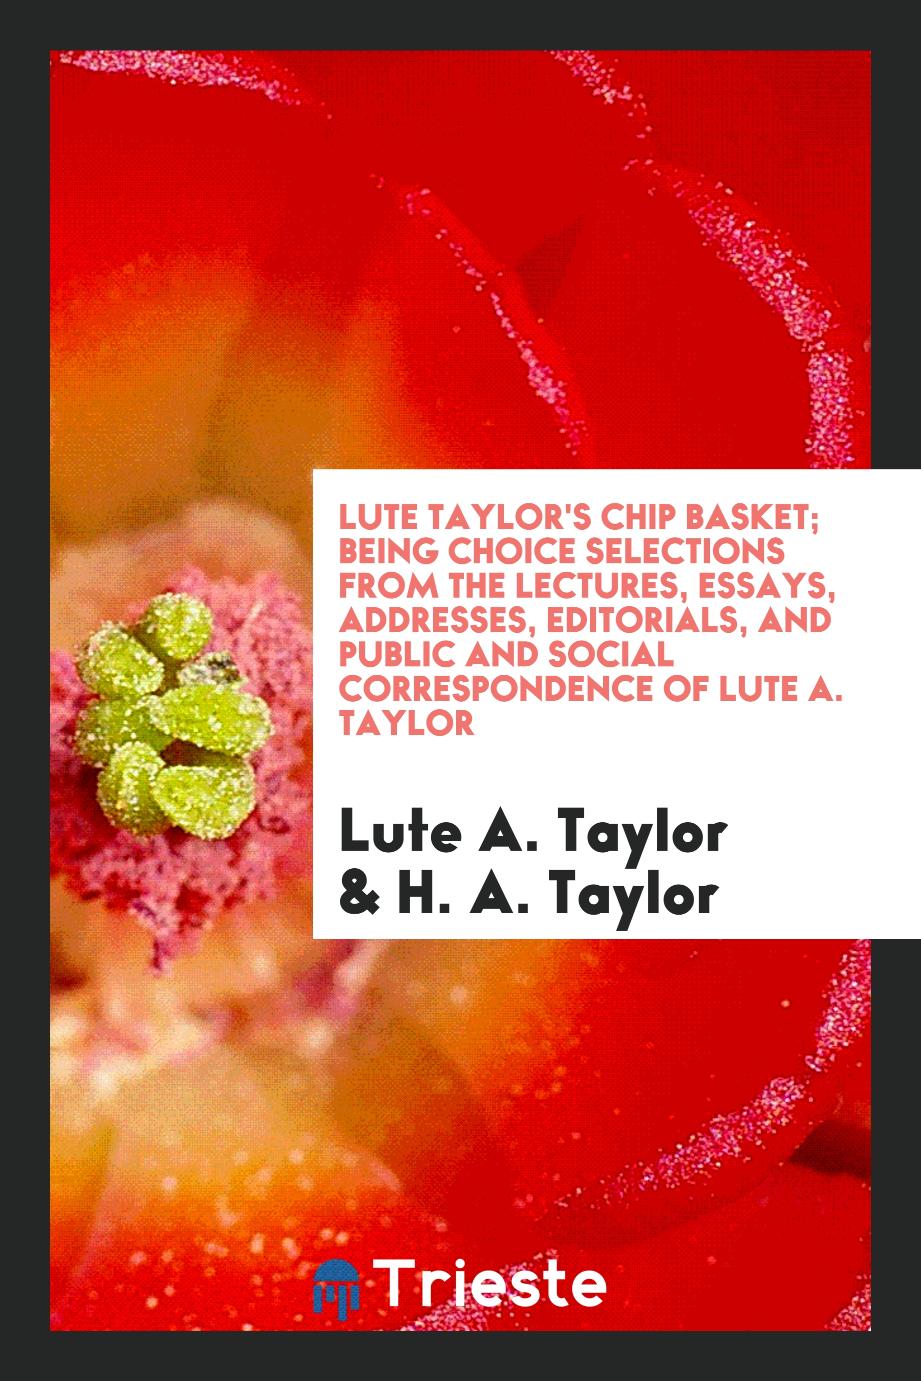 Lute Taylor's Chip basket; being choice selections from the lectures, essays, addresses, editorials, and public and social correspondence of Lute A. Taylor